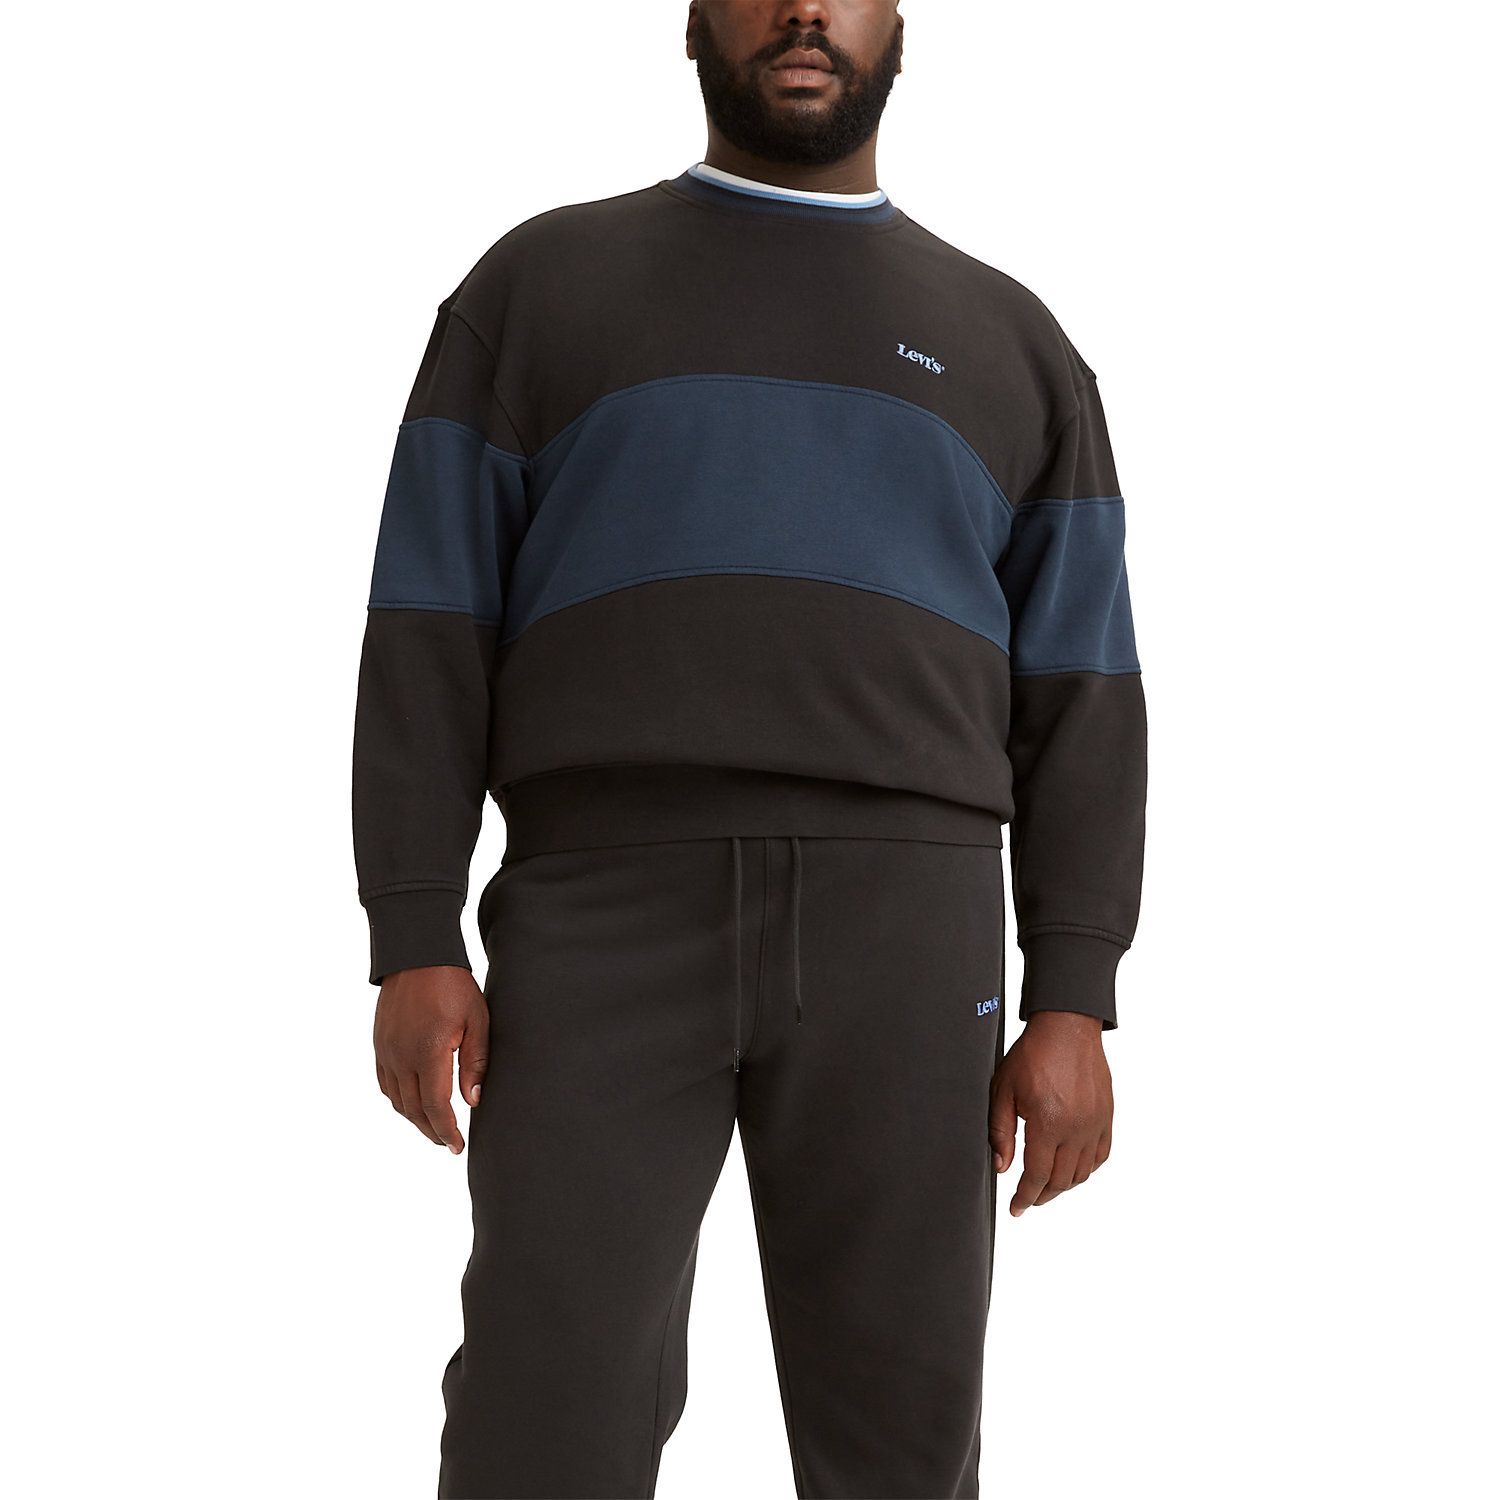 Image for Levi's Big & Tall Colorblock Crewneck Top at Kohl's.